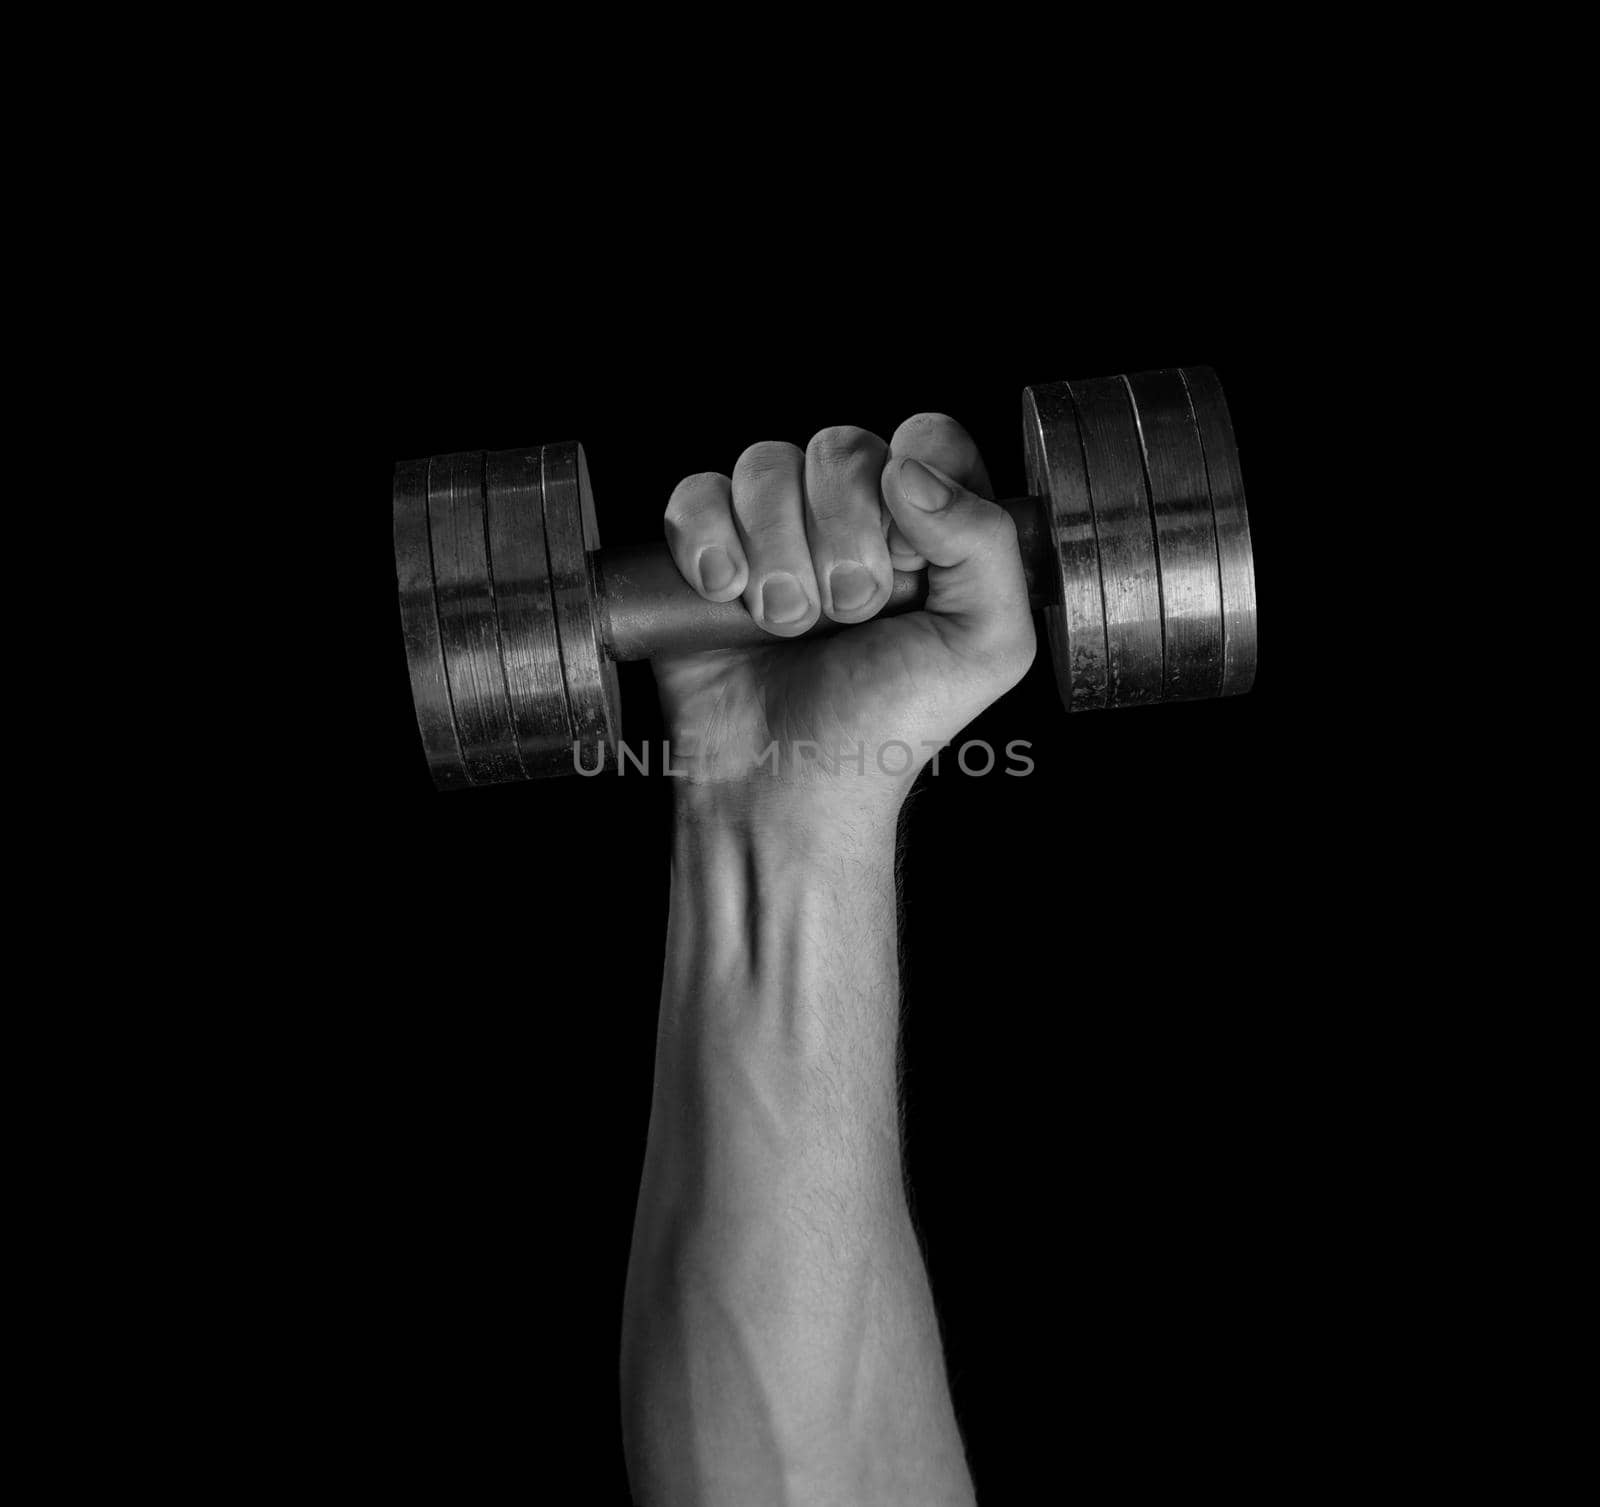 Male hand holds dumbbell on a black background, monochrome image